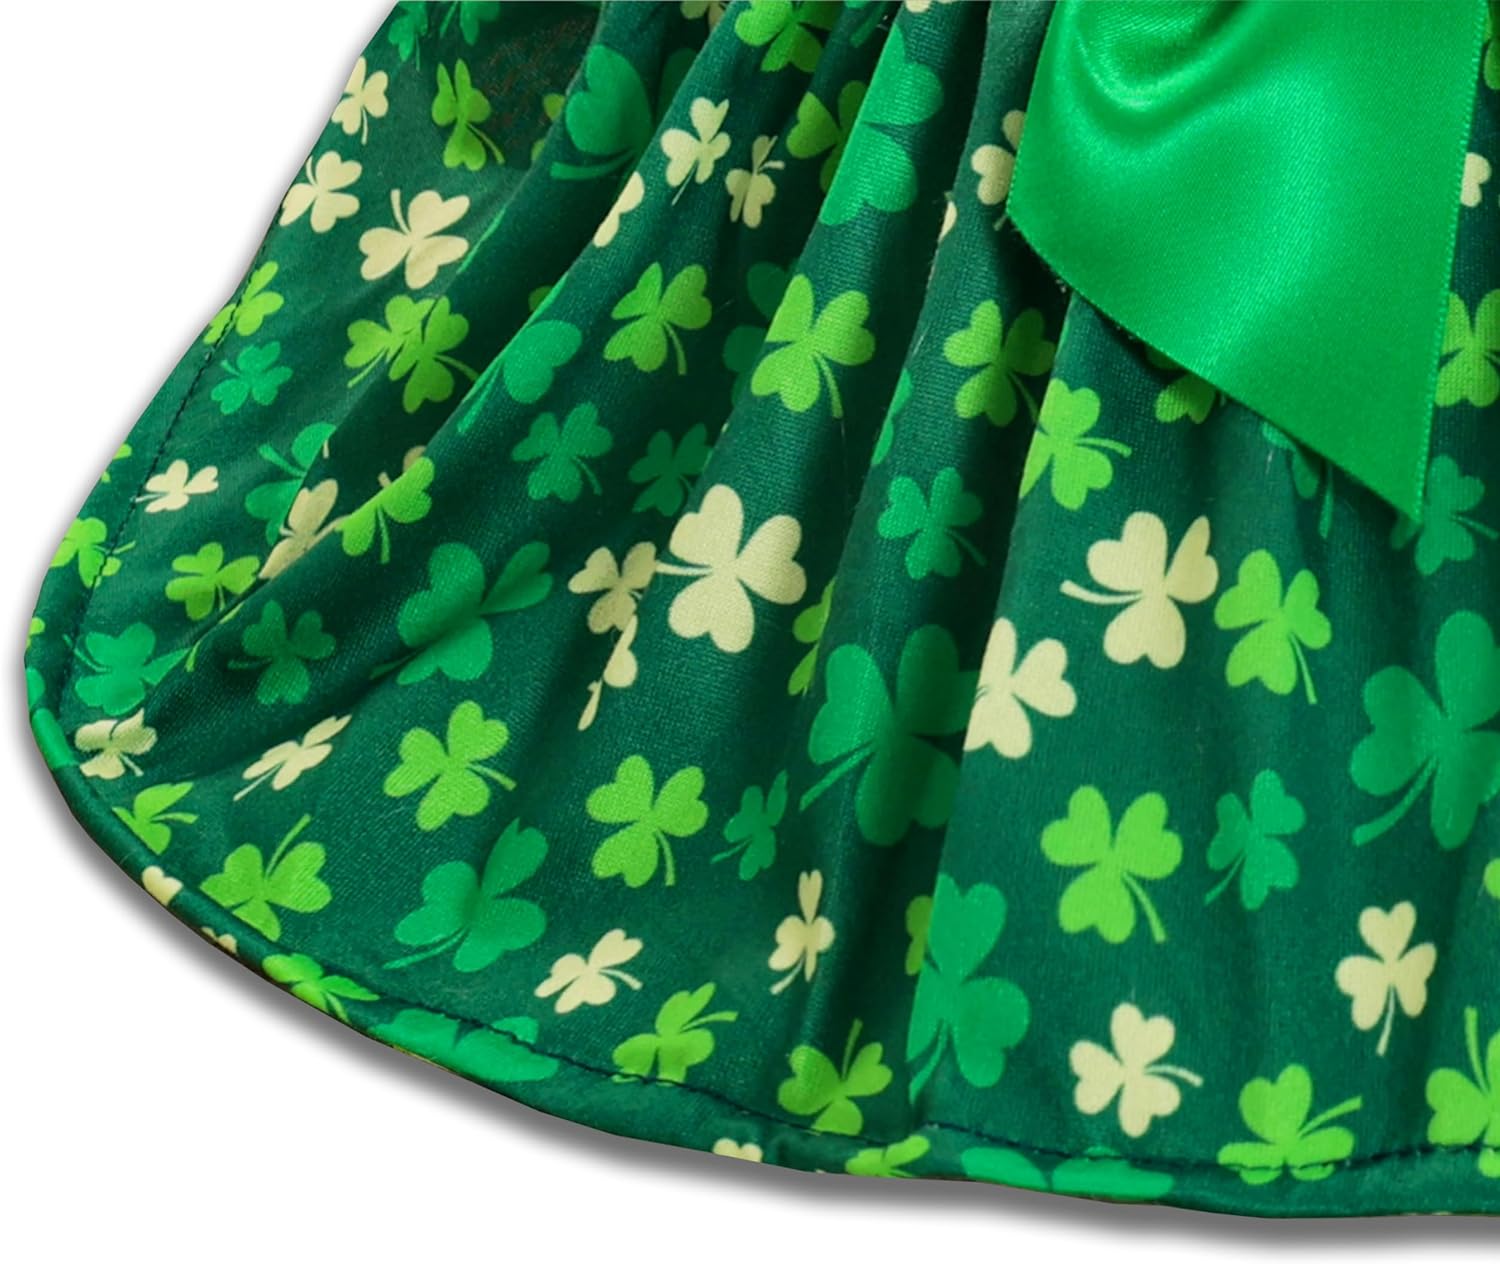 St. Patrick Day Dog Cat Dress, Holiday Irish Lucky Clover Shamrock Leaves Dress Outfits Skirt for Small Boys and Girls Puppies Pets Doggie